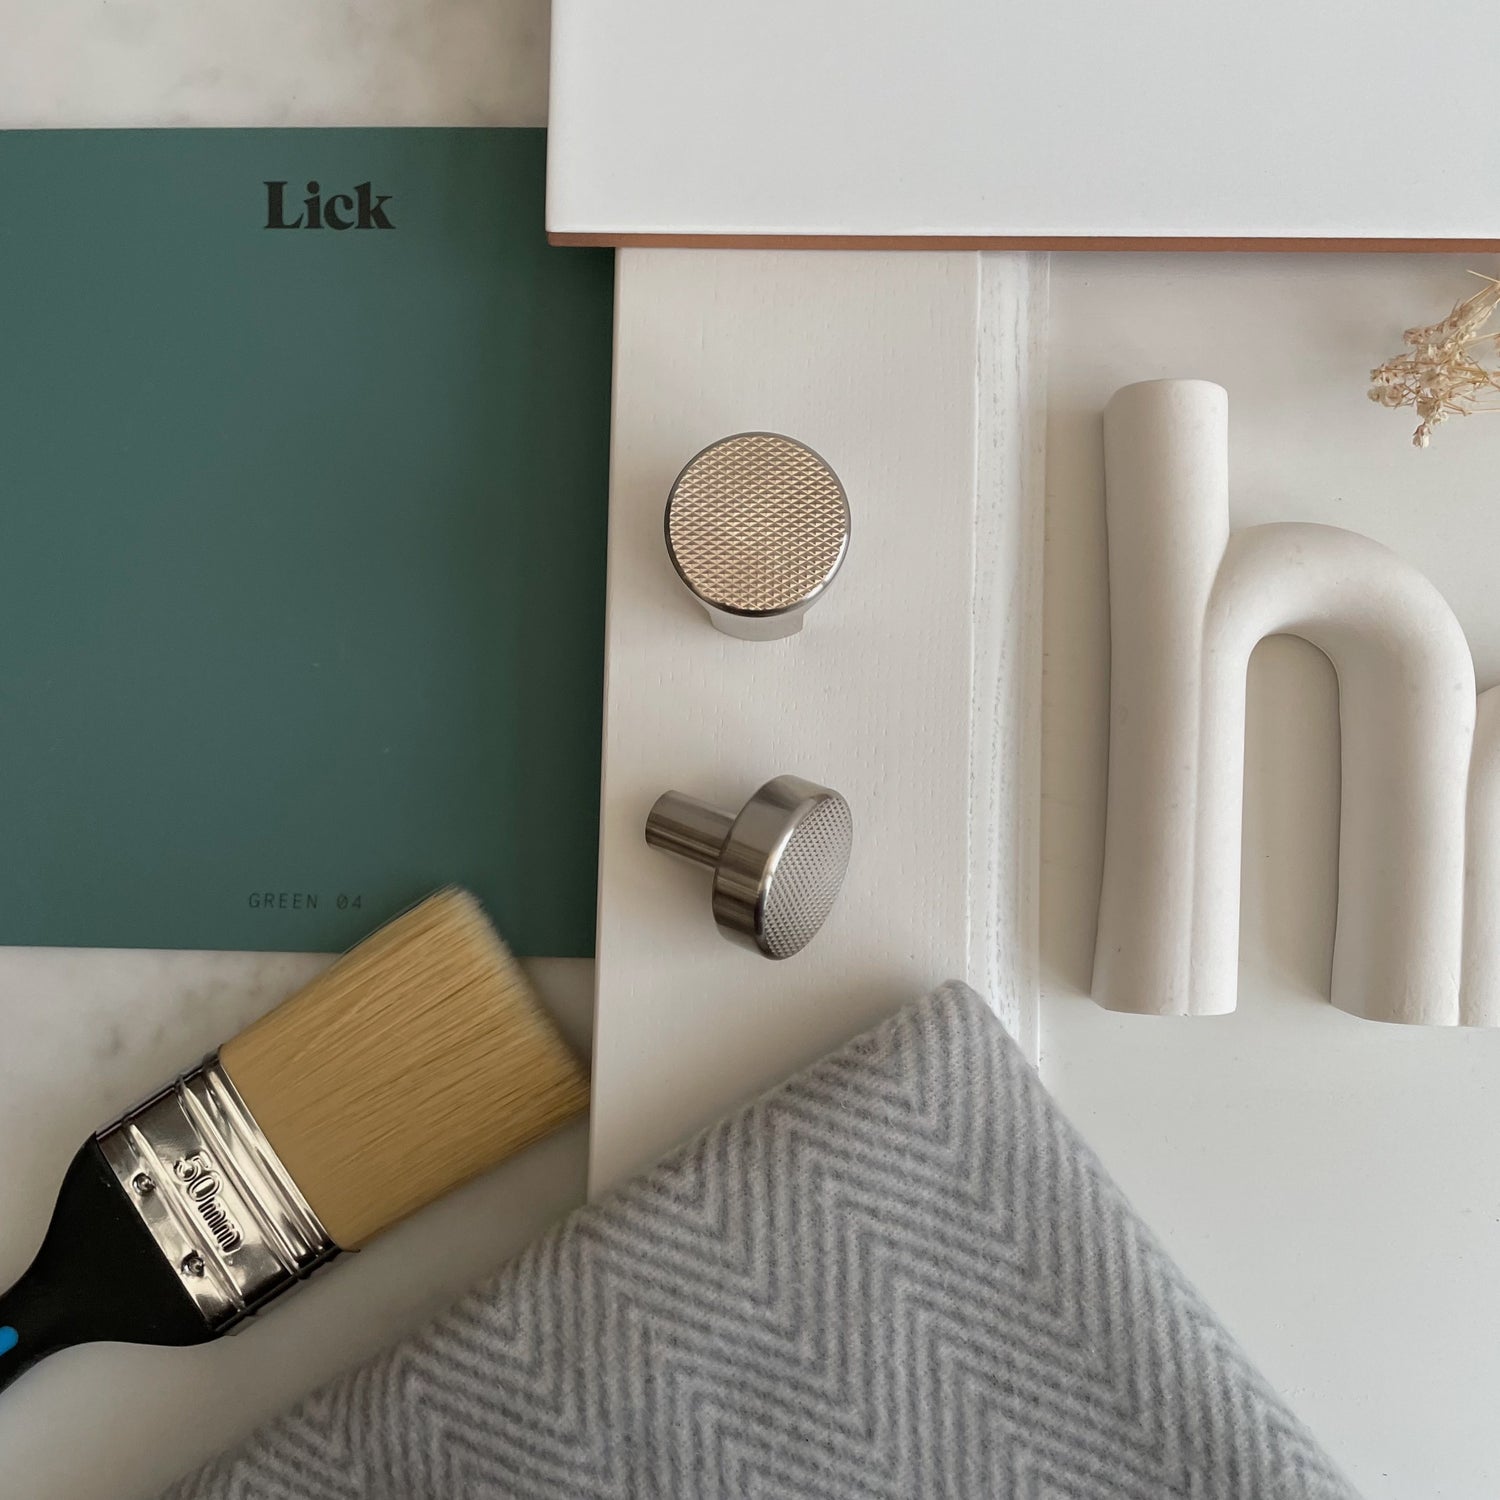 bude pull knob in satin nickel with adrestiasrevolt.co.uk and lick paint samples. interior design flat lay mood board for design projects in kent